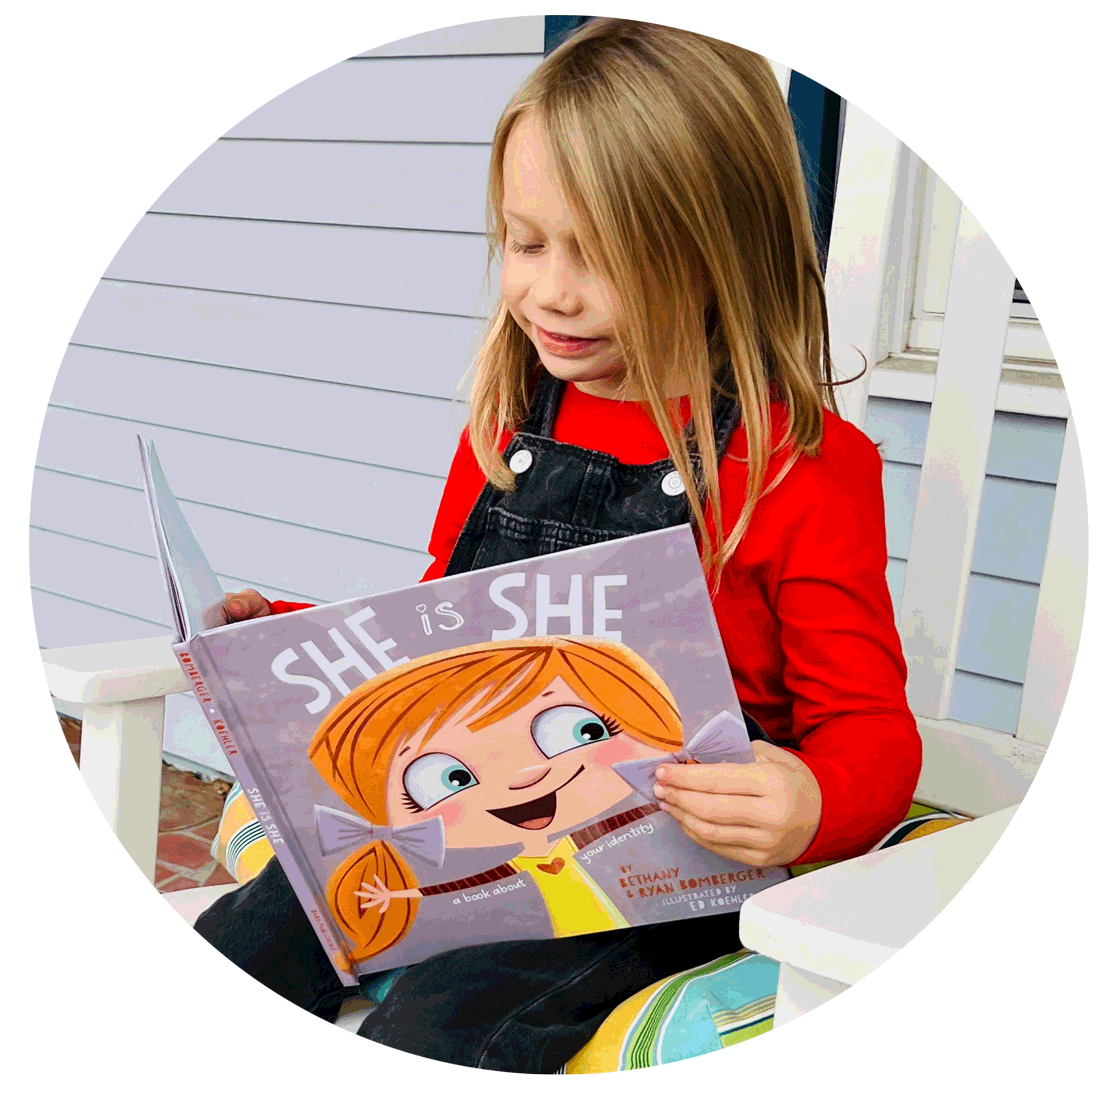 Rylee reads her new favorite book SHE IS SHE!